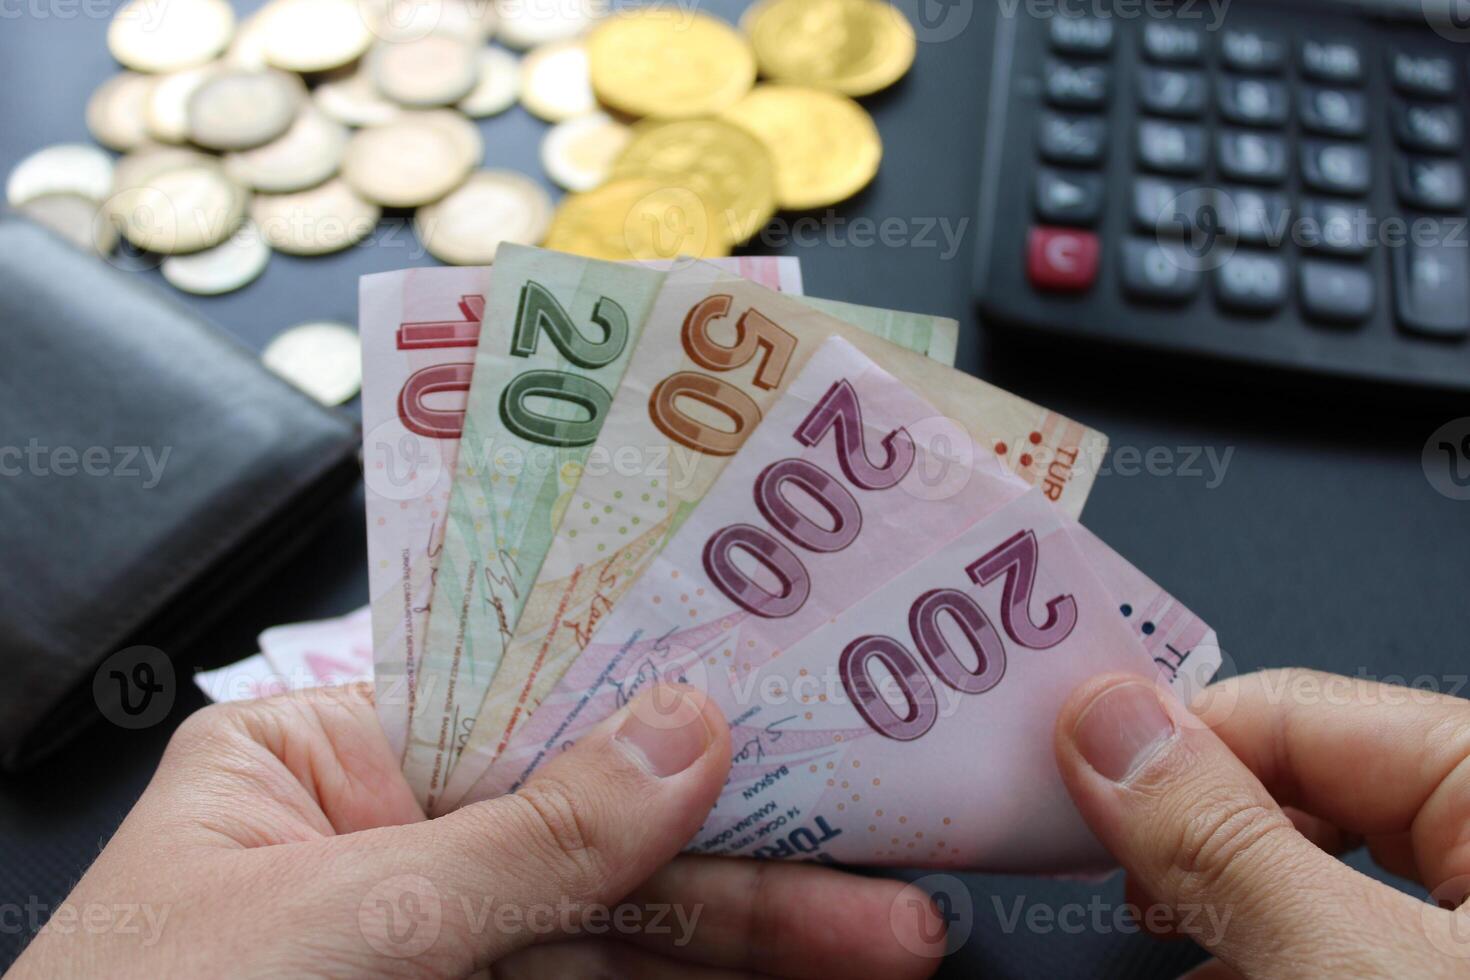 man counting Turkish money with his hand. Turkish lira banknotes. The paper currency of Turkey.Calculator in the background. For tax and hike news. photo